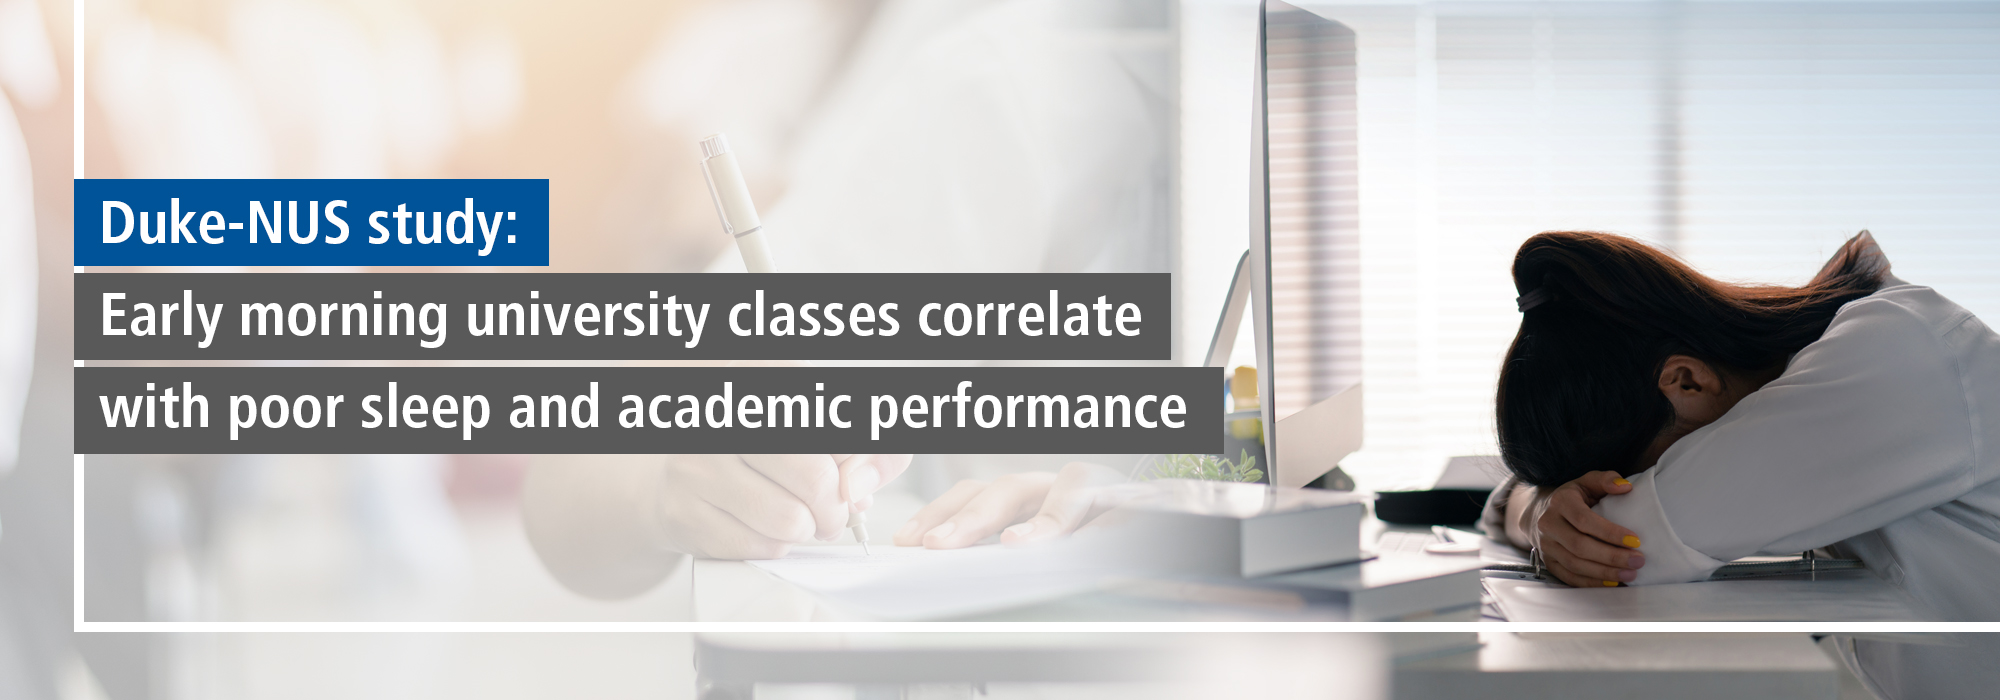 Early morning university classes correlate with poor sleep and academic performance